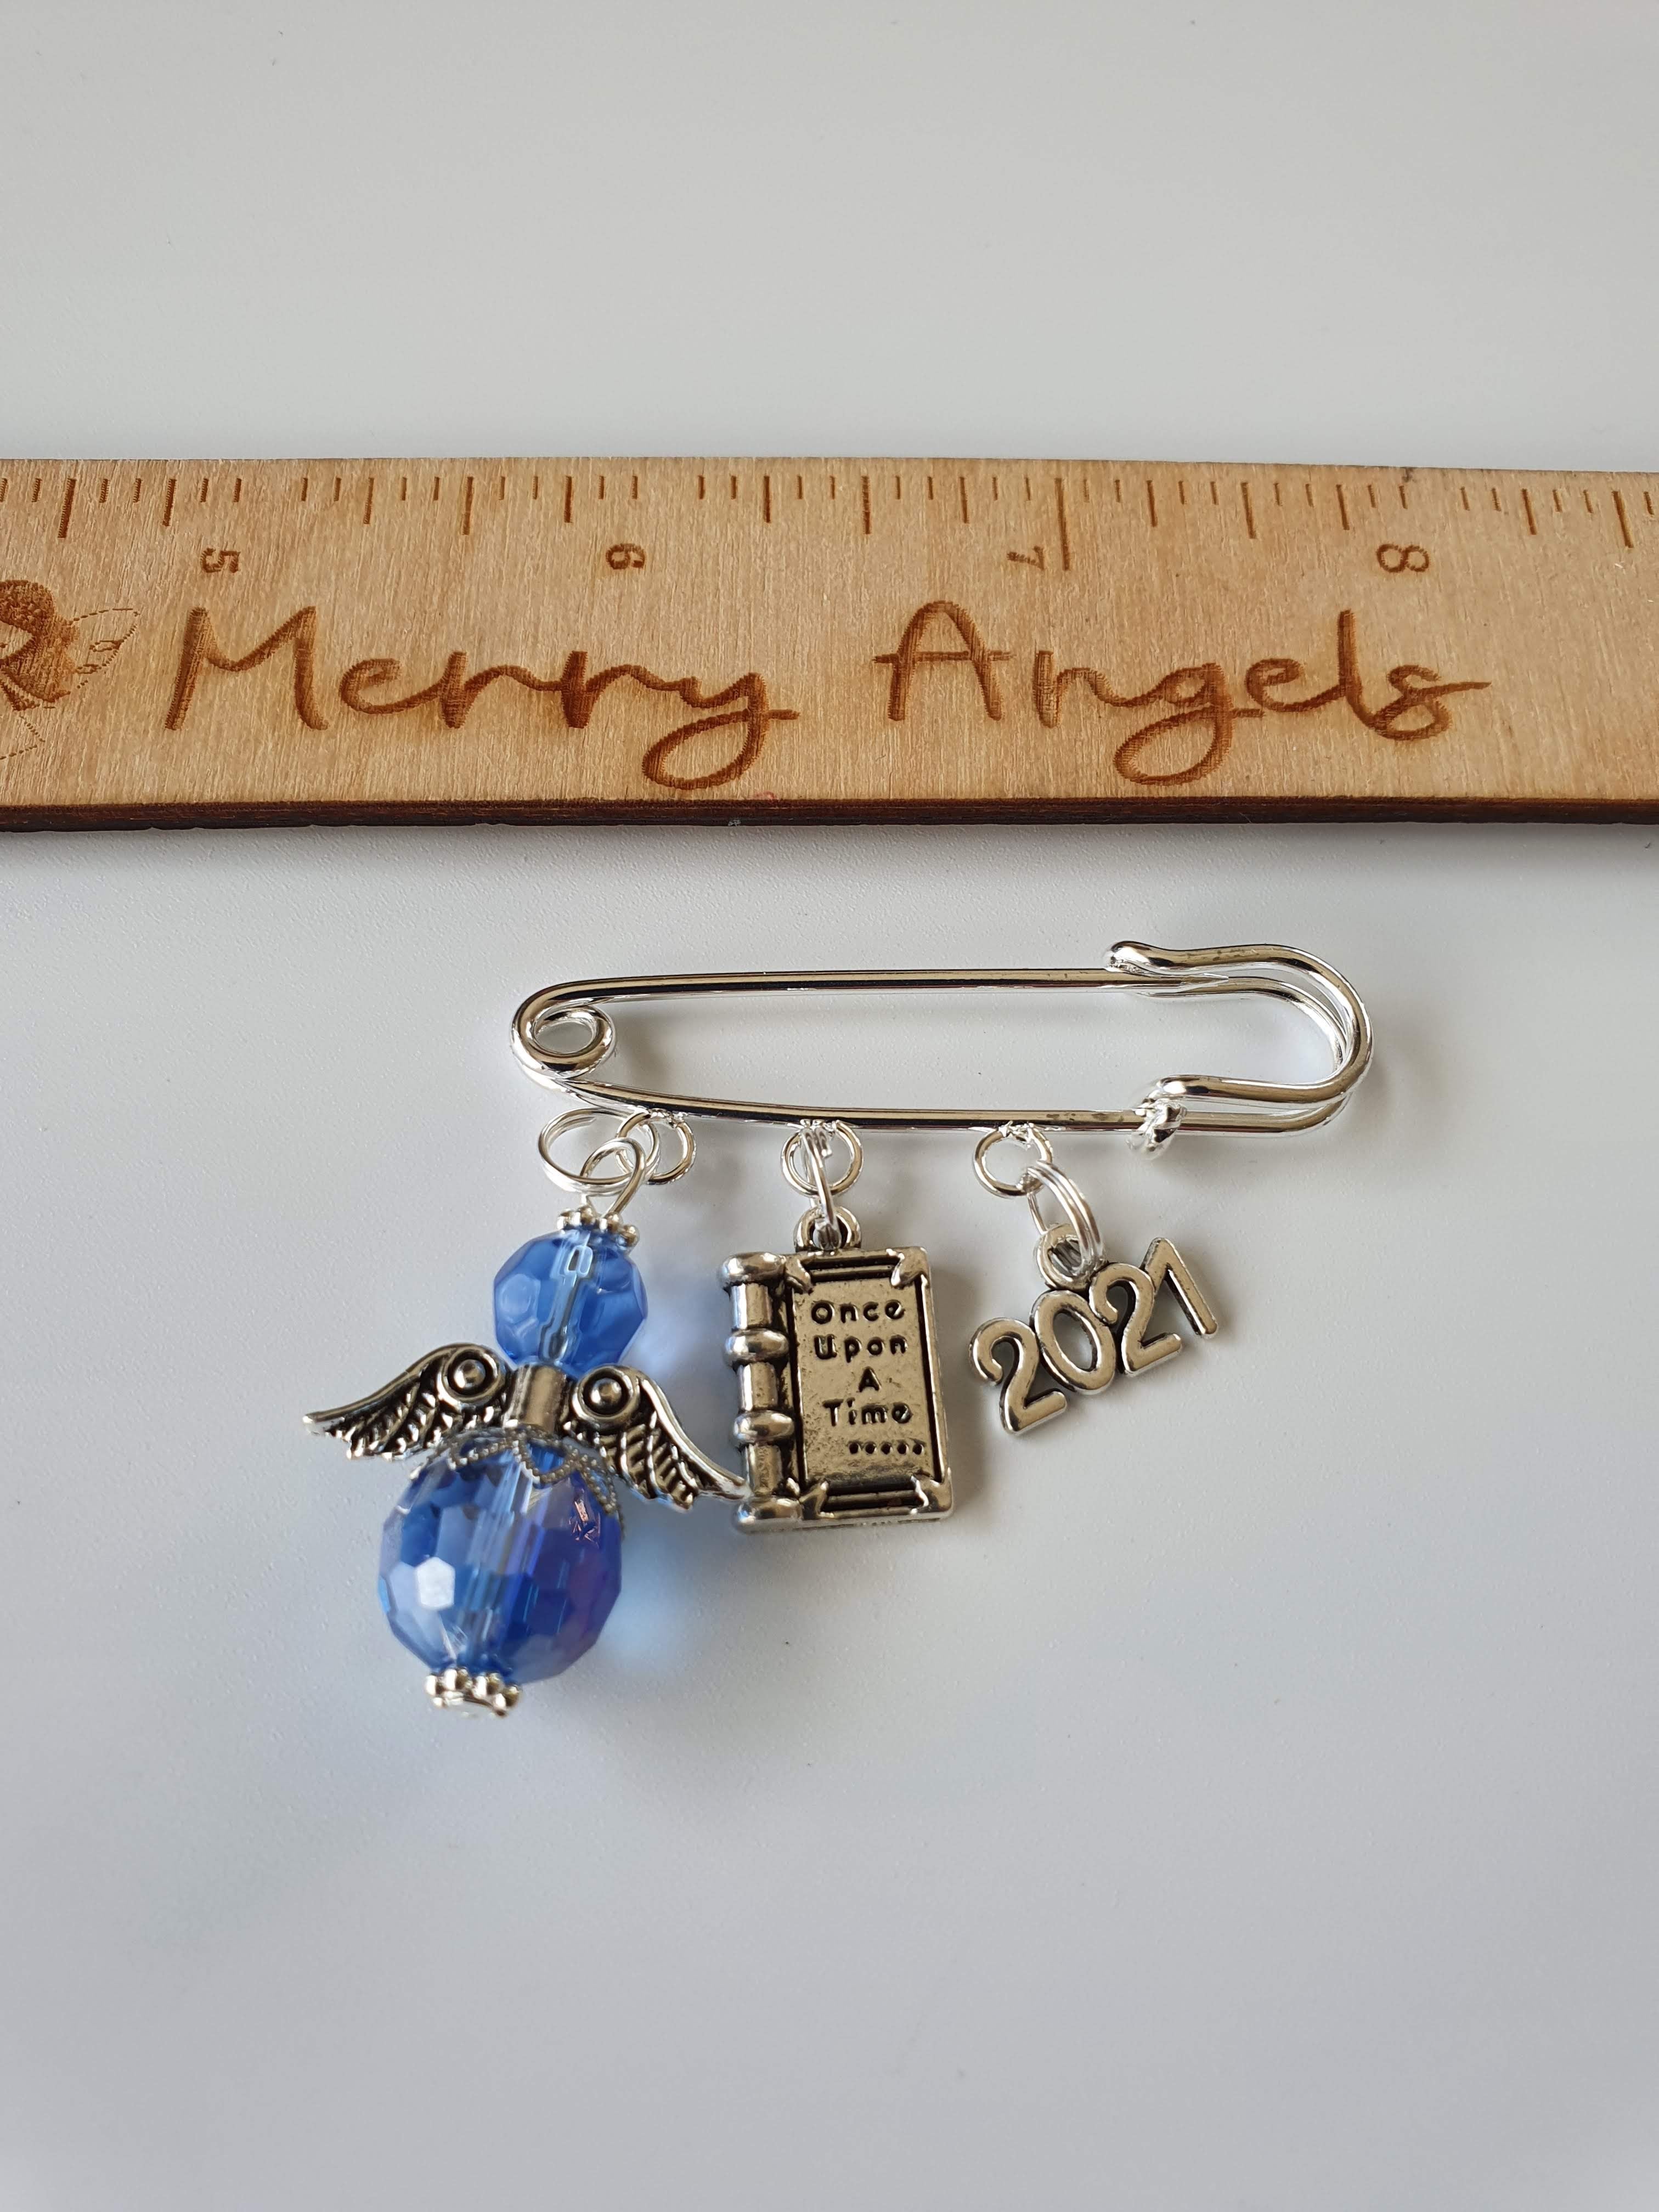 A silver pram pin with a blue angel with silver wings, a silver book charm with the words 'once upon a time' engraved on it, and a silver 2021 charm.